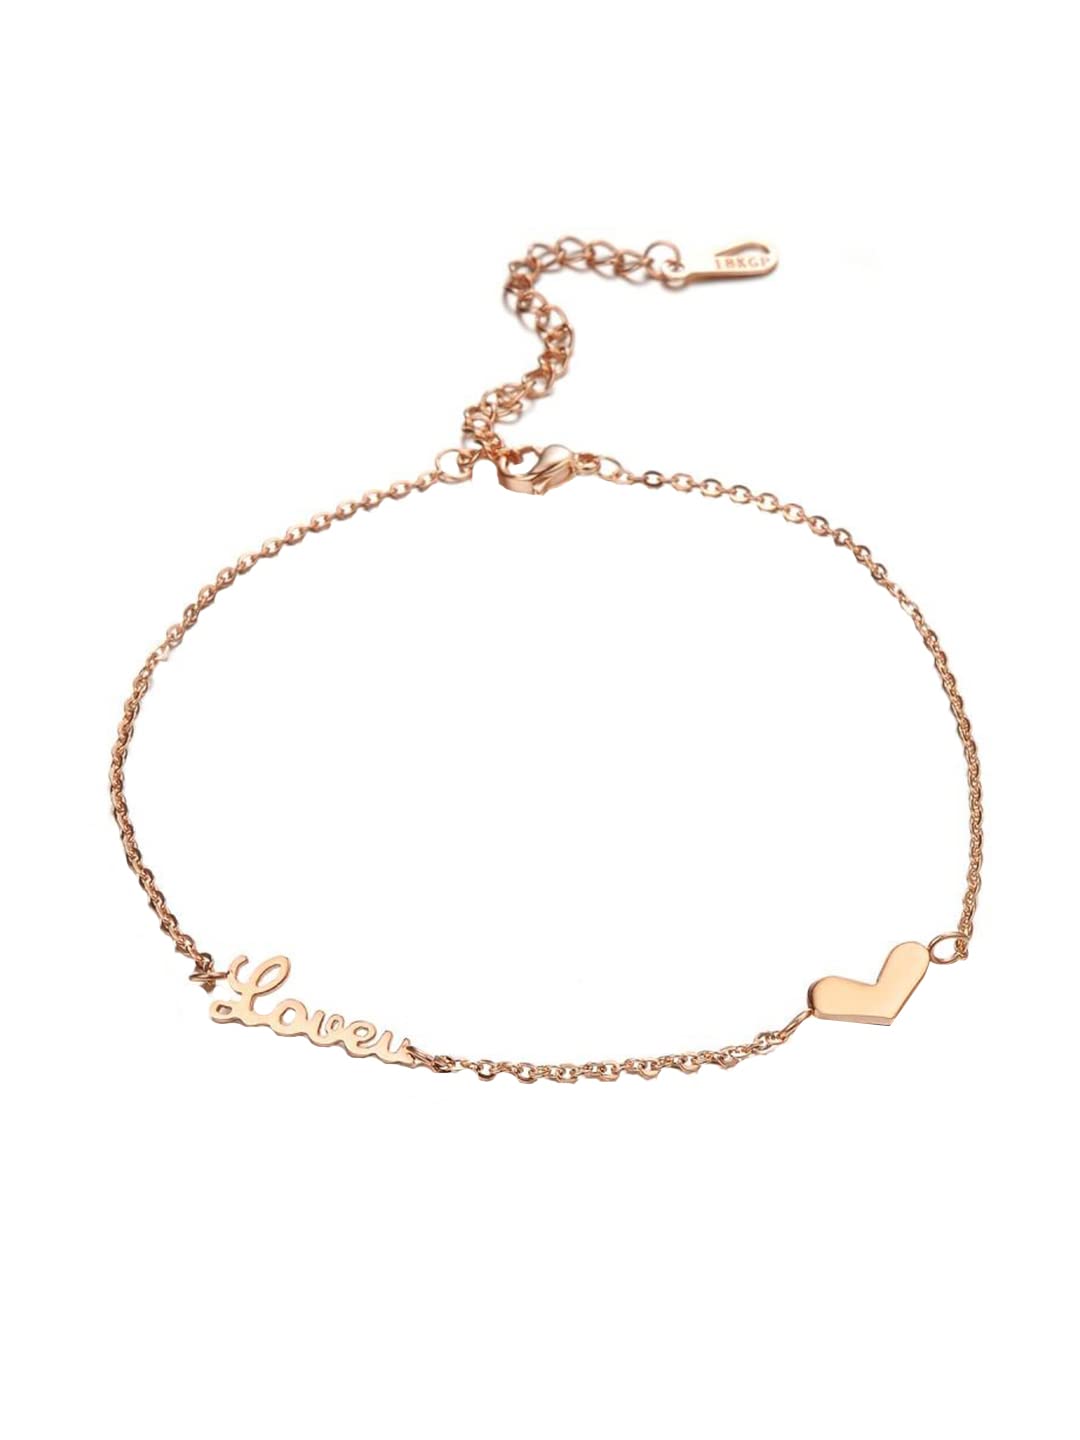 Yellow Chimes Anklets for Women Rose Gold-Plated Stainless Steel Love Heart-Shaped Fashion Anklet For Women and Girls